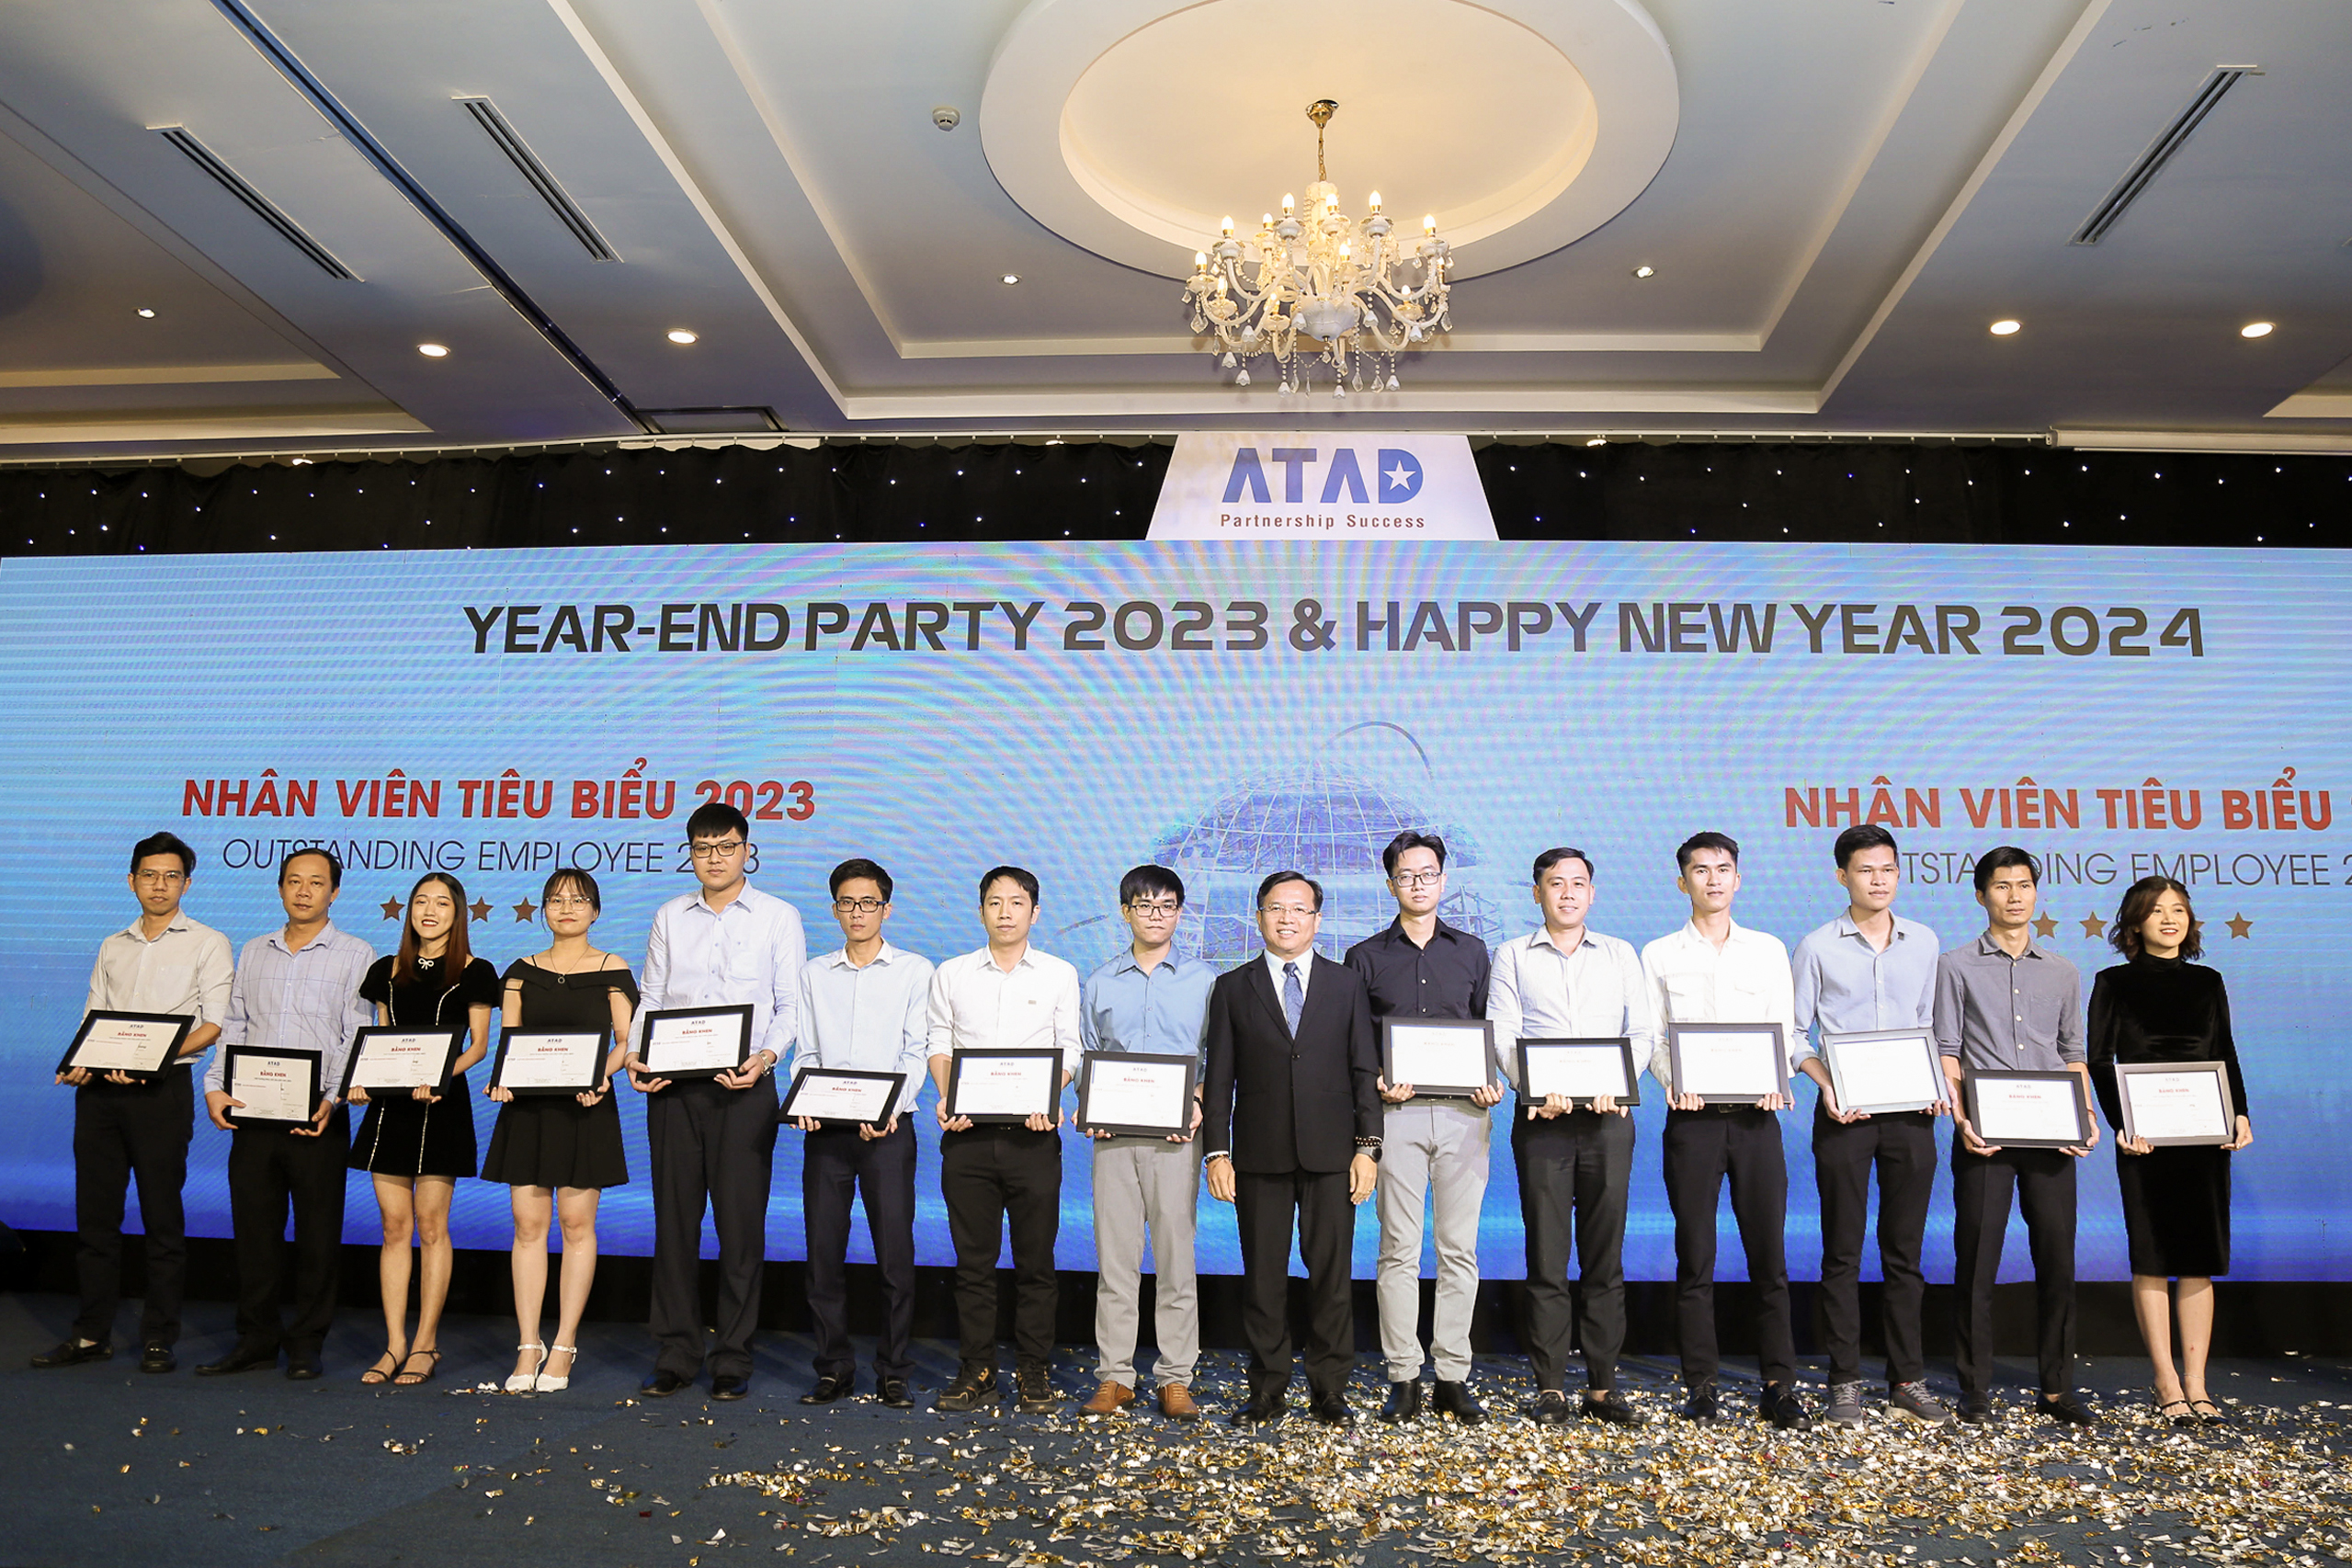 YEAR-END PARTY 2023 & WELCOME NEW YEAR 2024